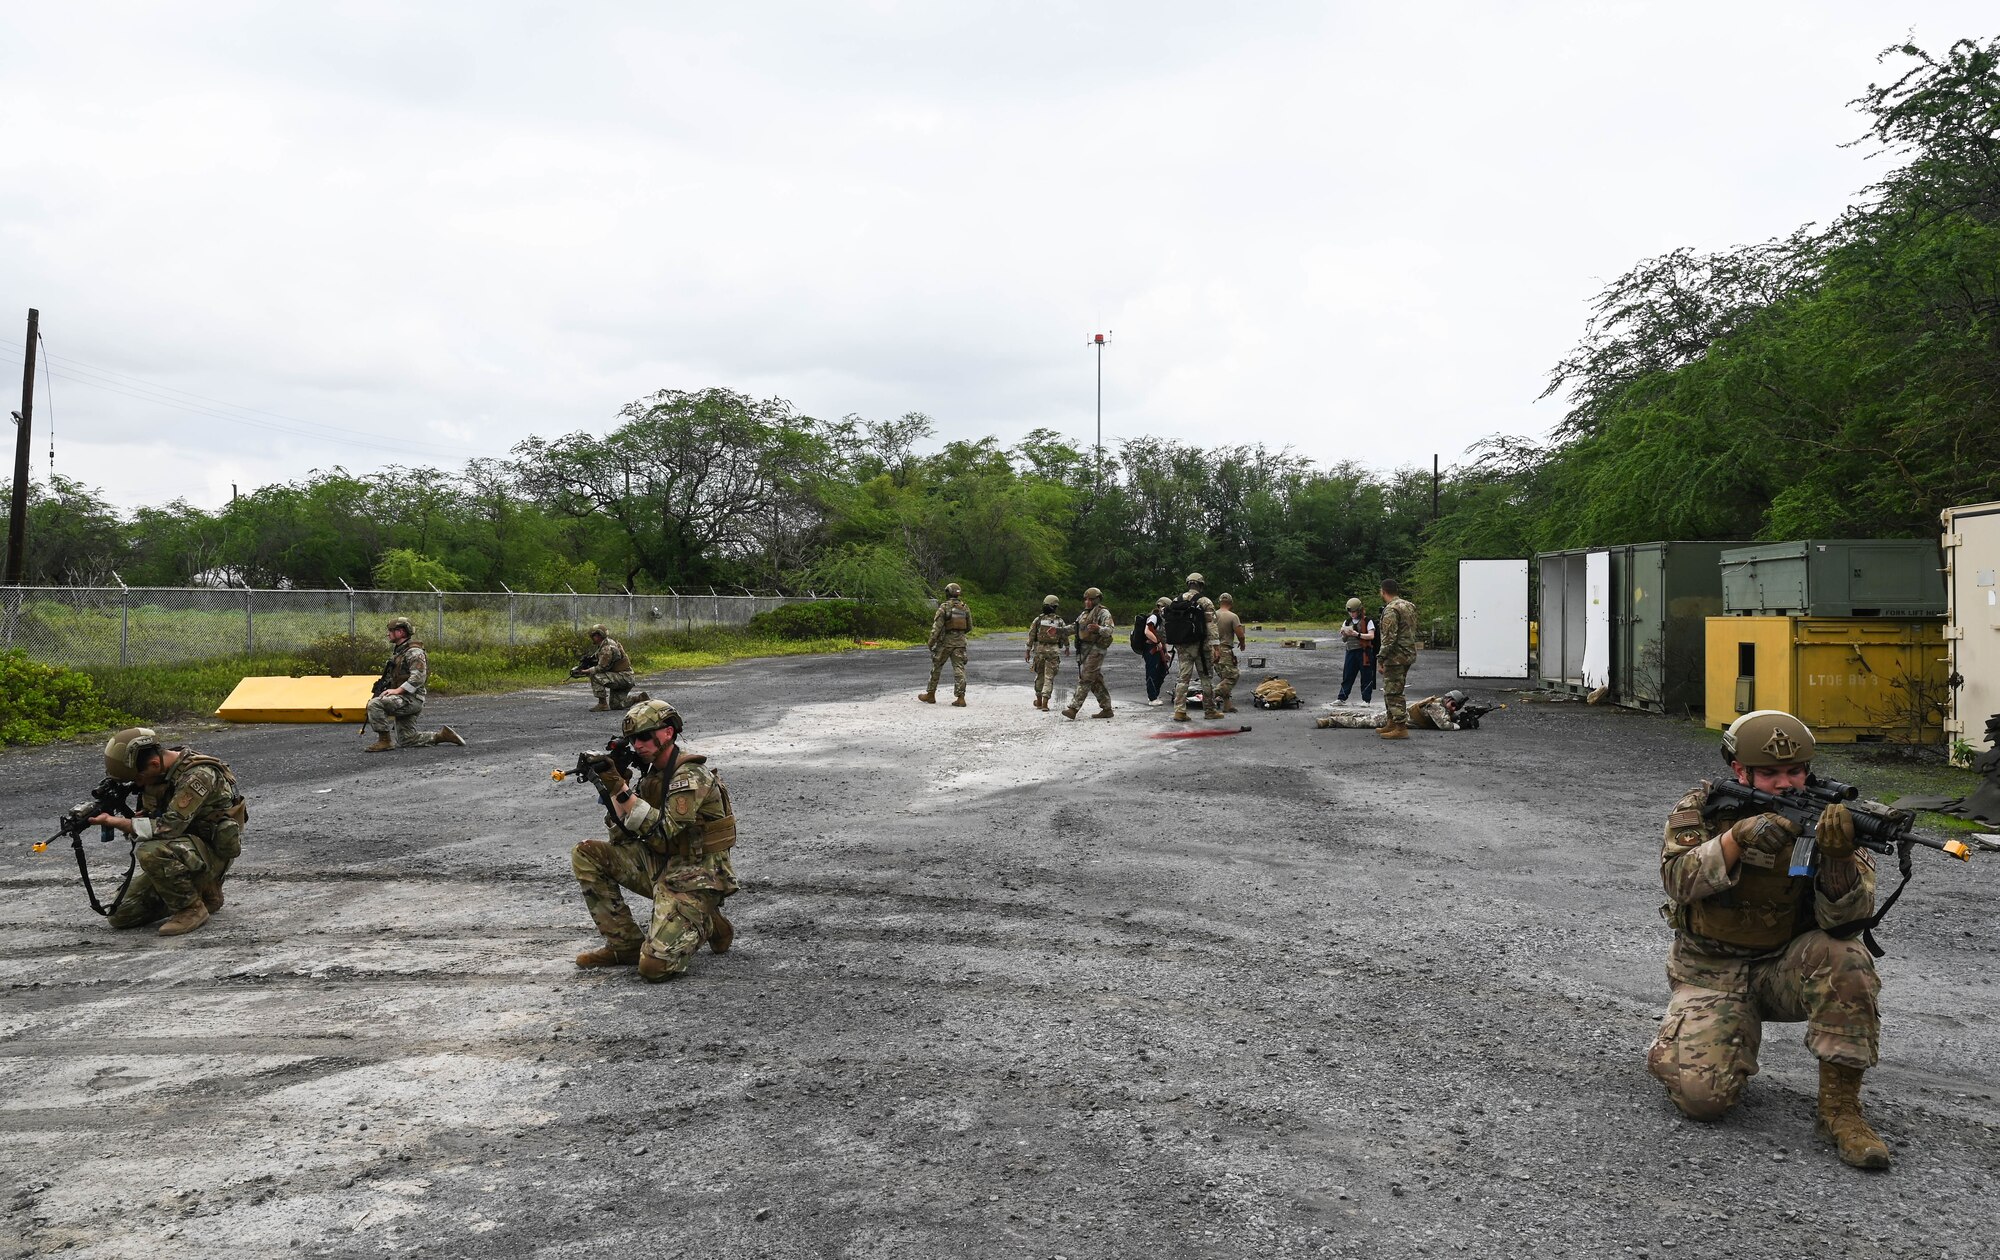 Airmen assigned to the 647th Security Forces Squadron form a circle around a simulated extraction point during a joint field training exercise with the 15th Medical Group at Joint Base Pearl Harbor-Hickam, Hawaii, Jan. 12, 2022. A total of 37 Airmen participated in the joint training in order to fulfill readiness training required by the Department of Defense. (U.S. Air Force photo by Staff Sgt. Alan Ricker)